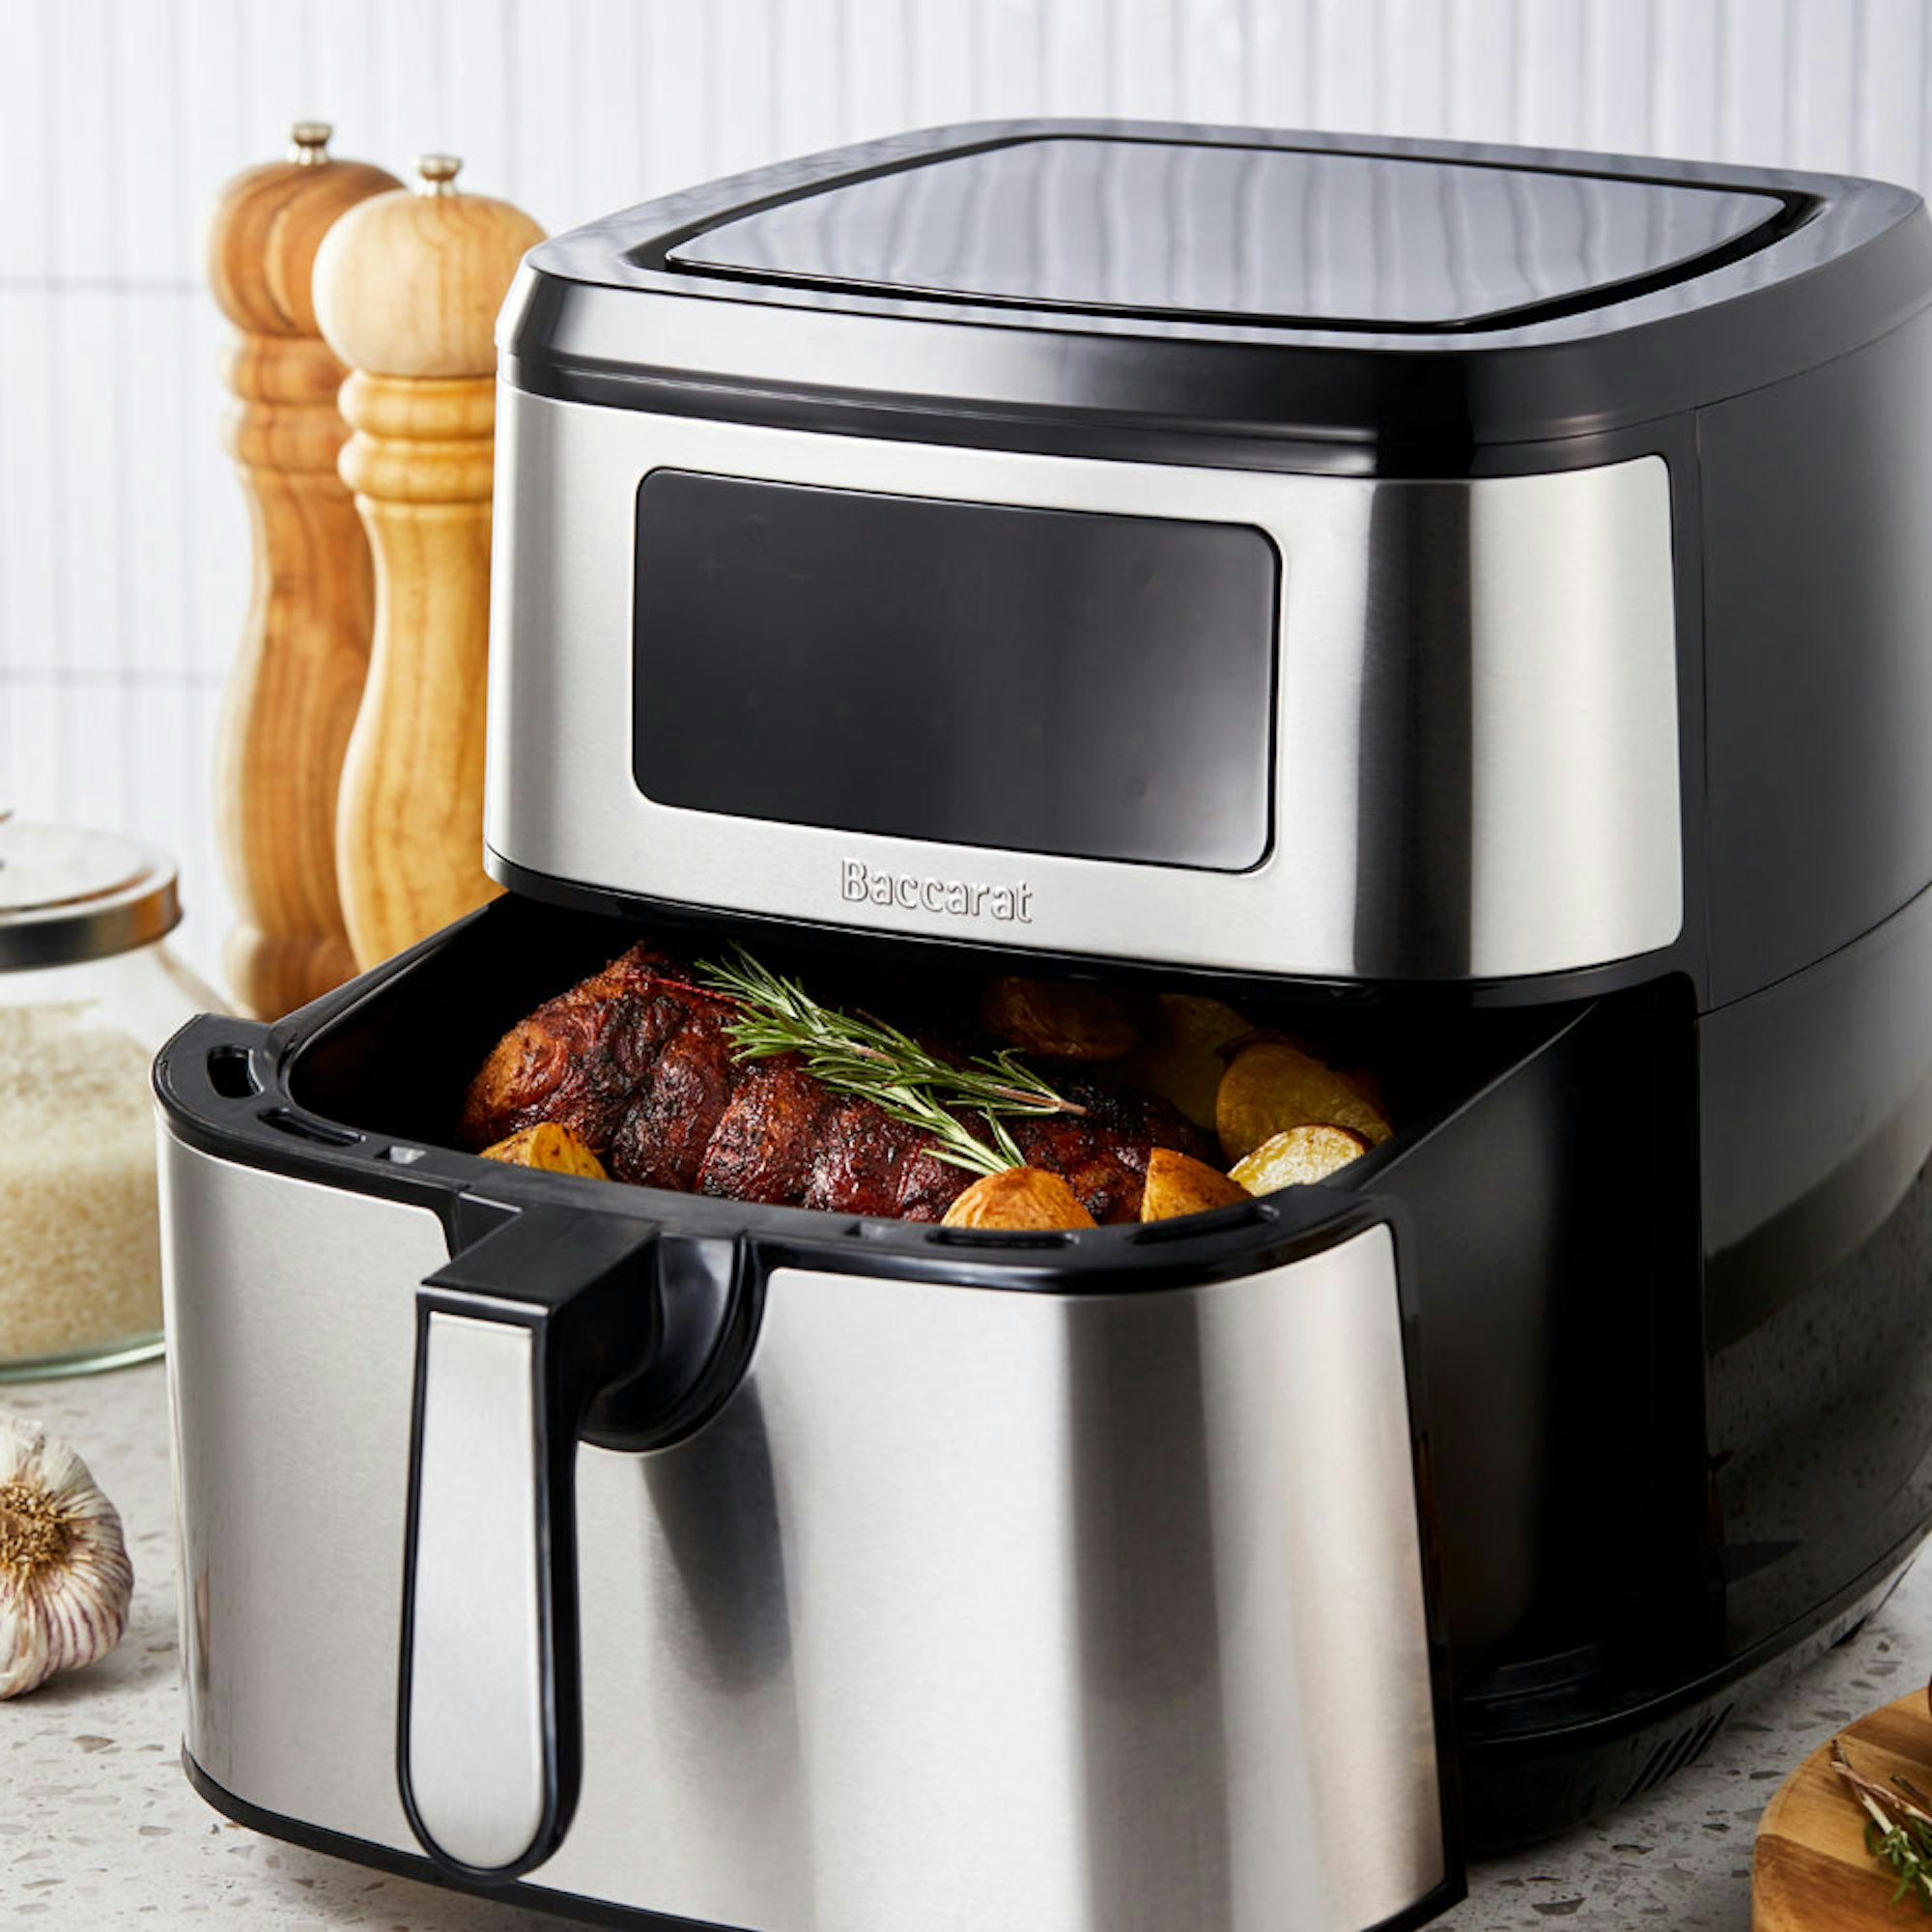 Baccarat Appliances. Baccarat The Healthy Fry 9L Air Fryer with roast on the kitchen bench.